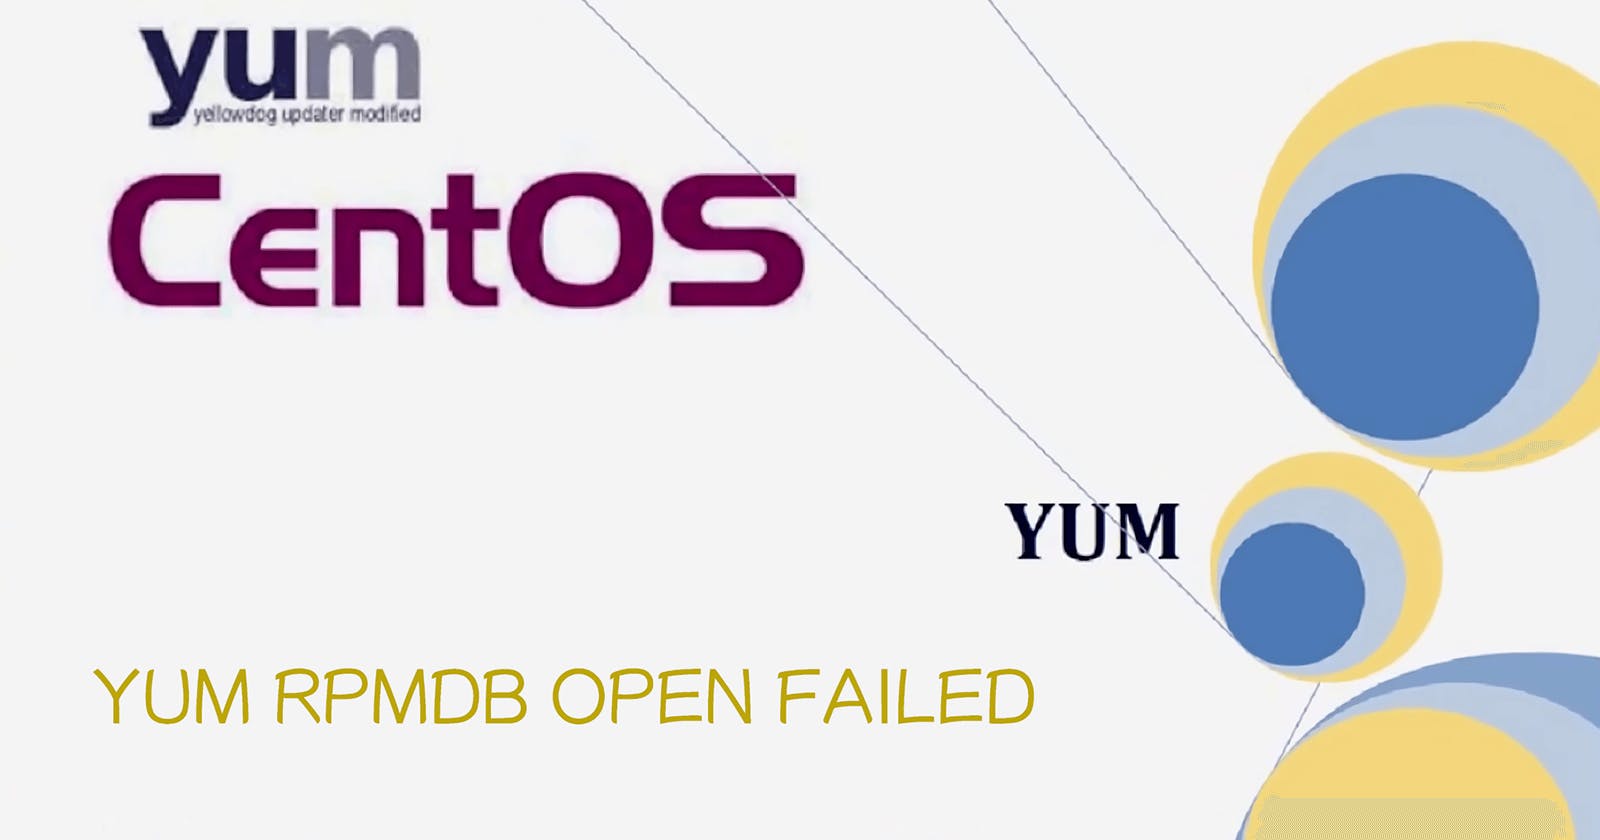 fix the problem "yum rpmdb open failed" when installing apps on CentOS 7